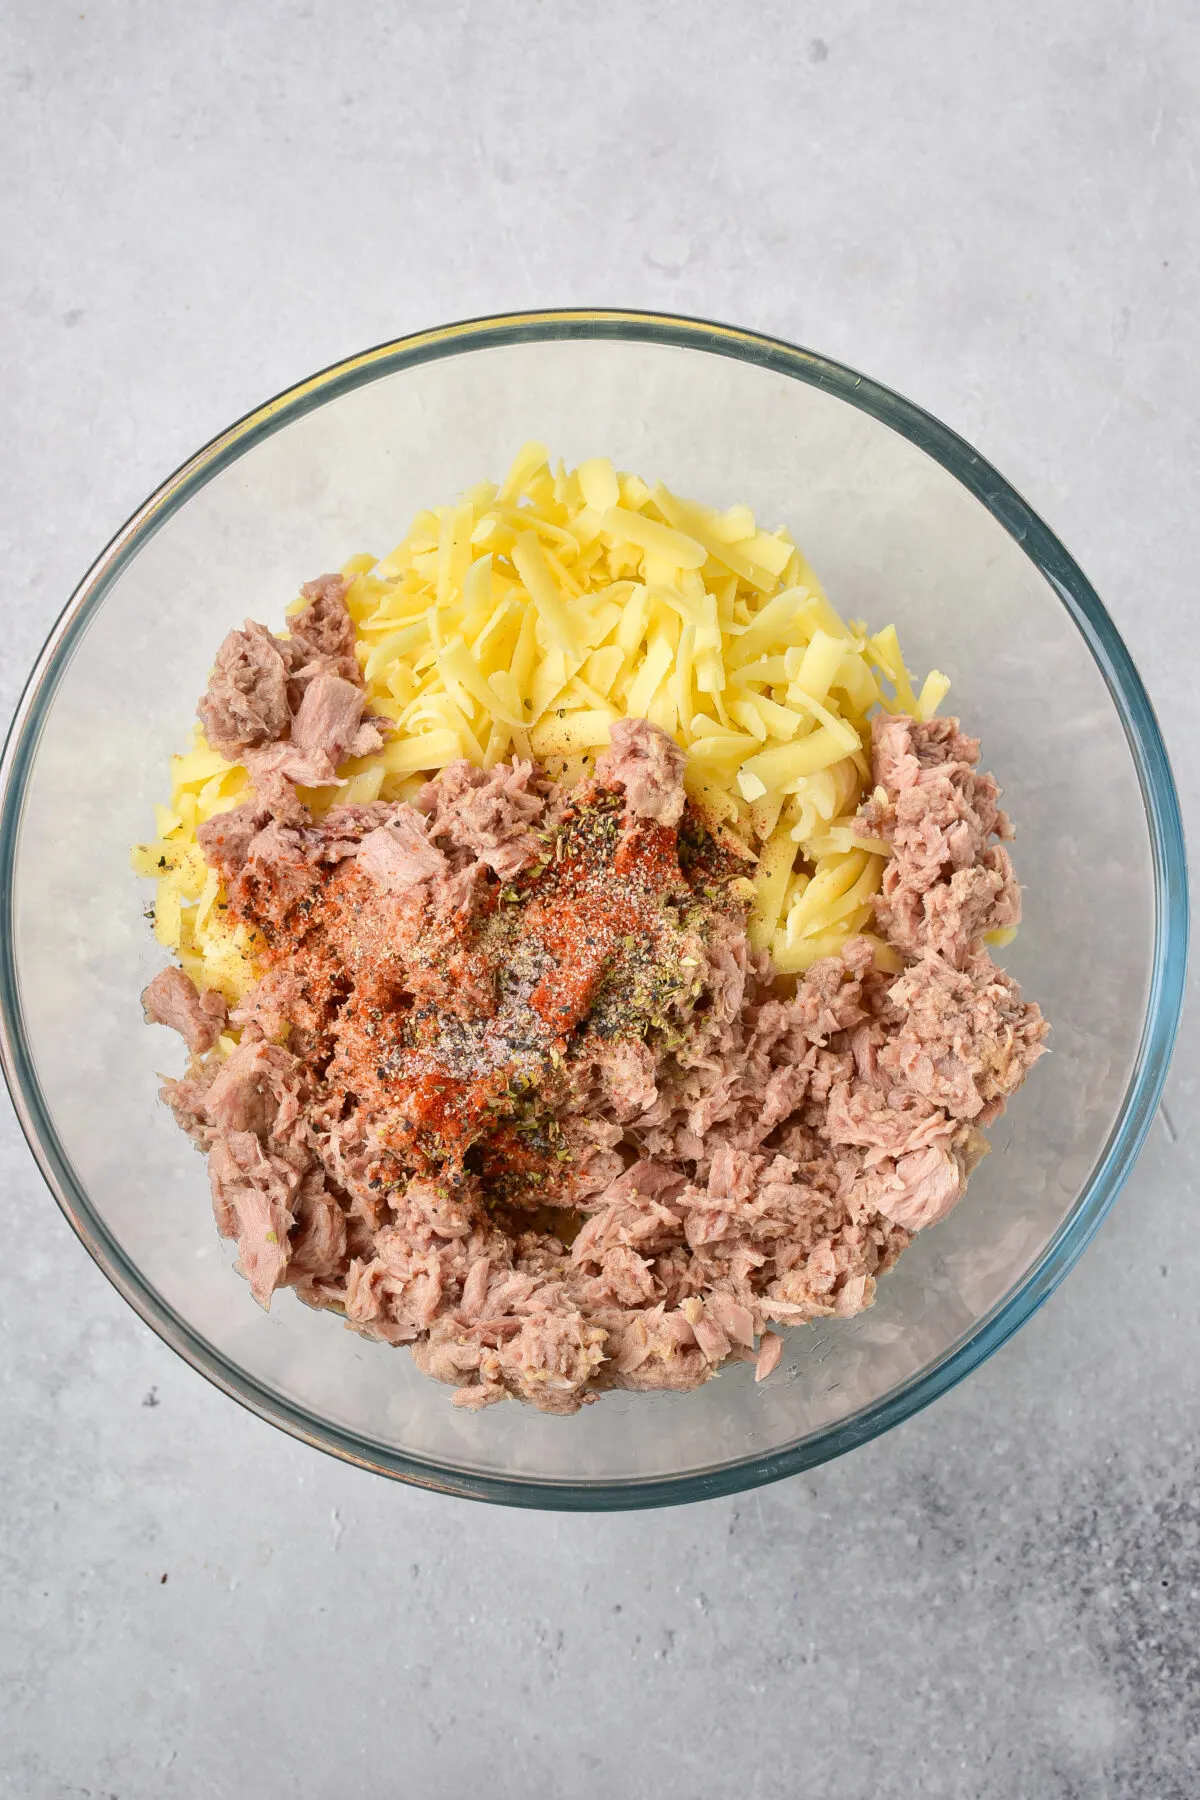 Tuna, pasta, cheddar, salt and seasonings in a large glass bowl.